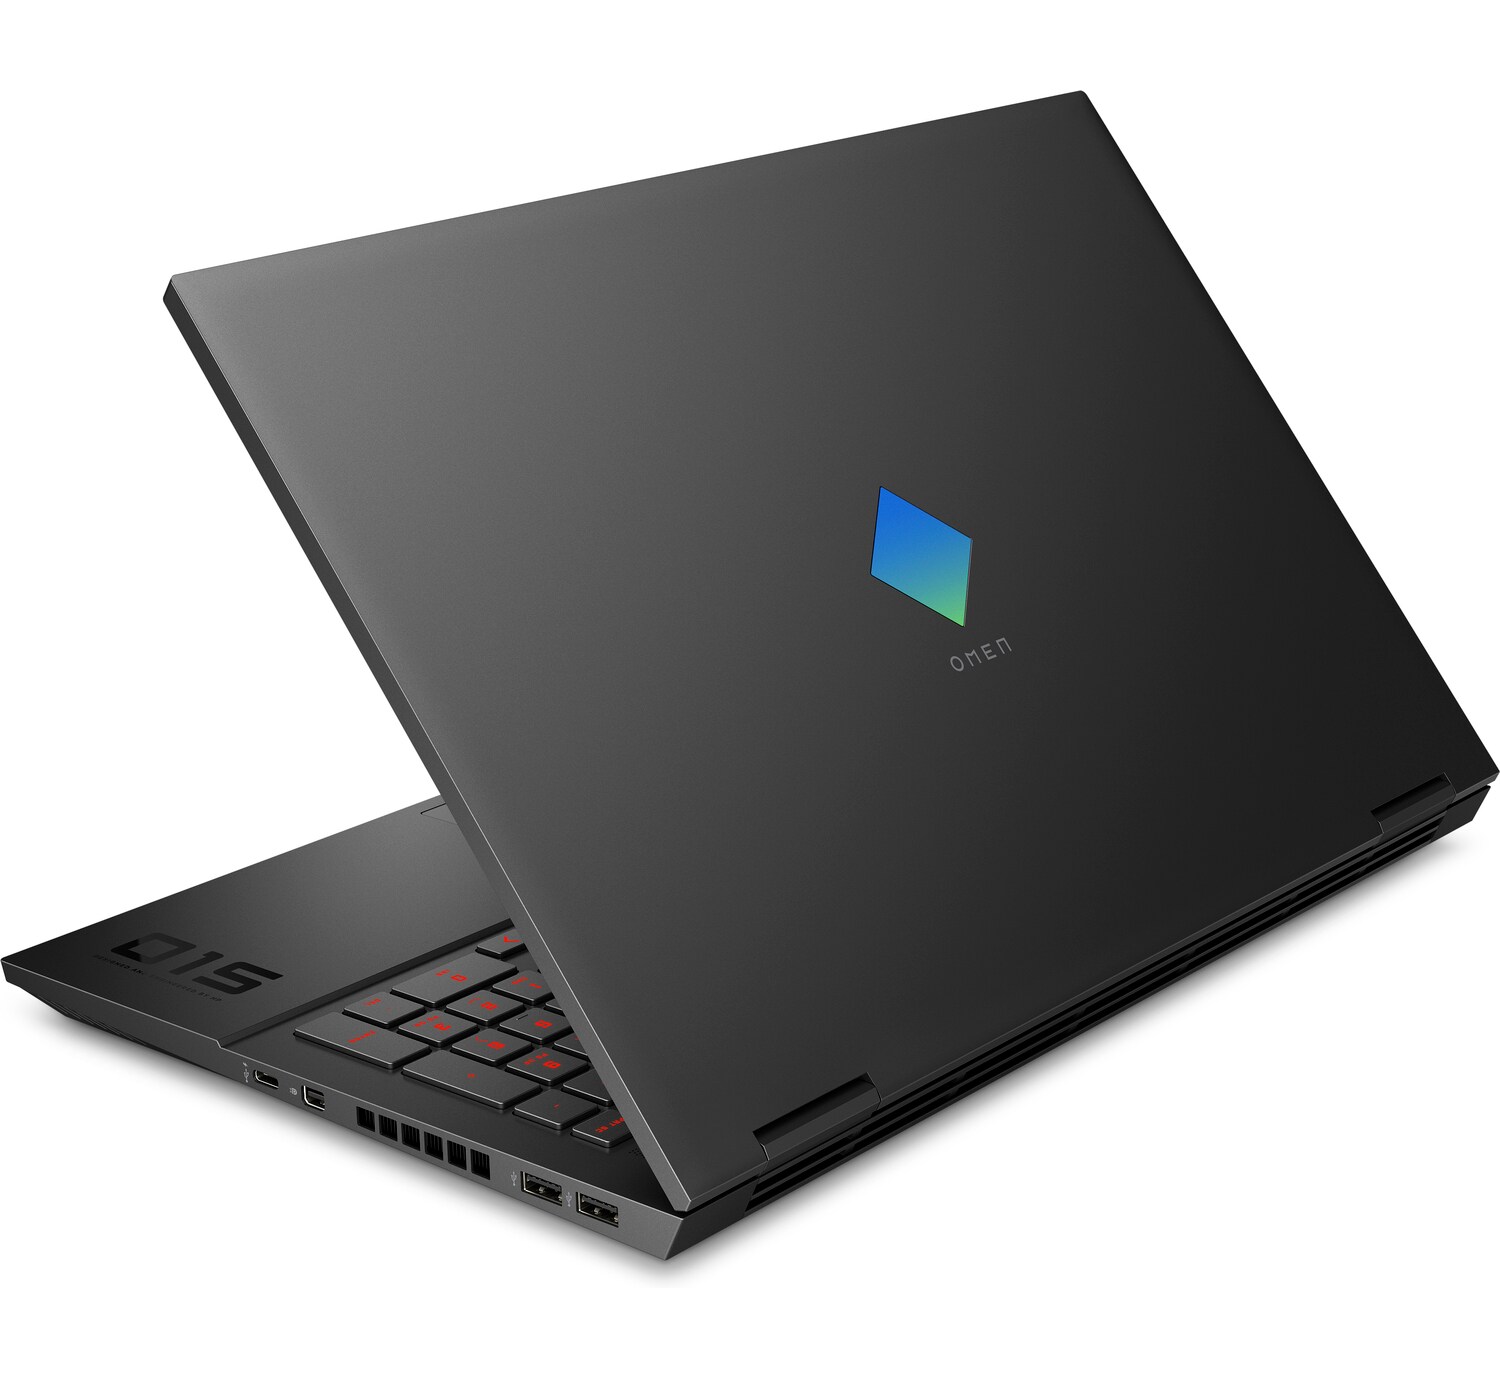 The 10th Gen Intel® Core™ powered HP Omen 15 laptop looks incredibly